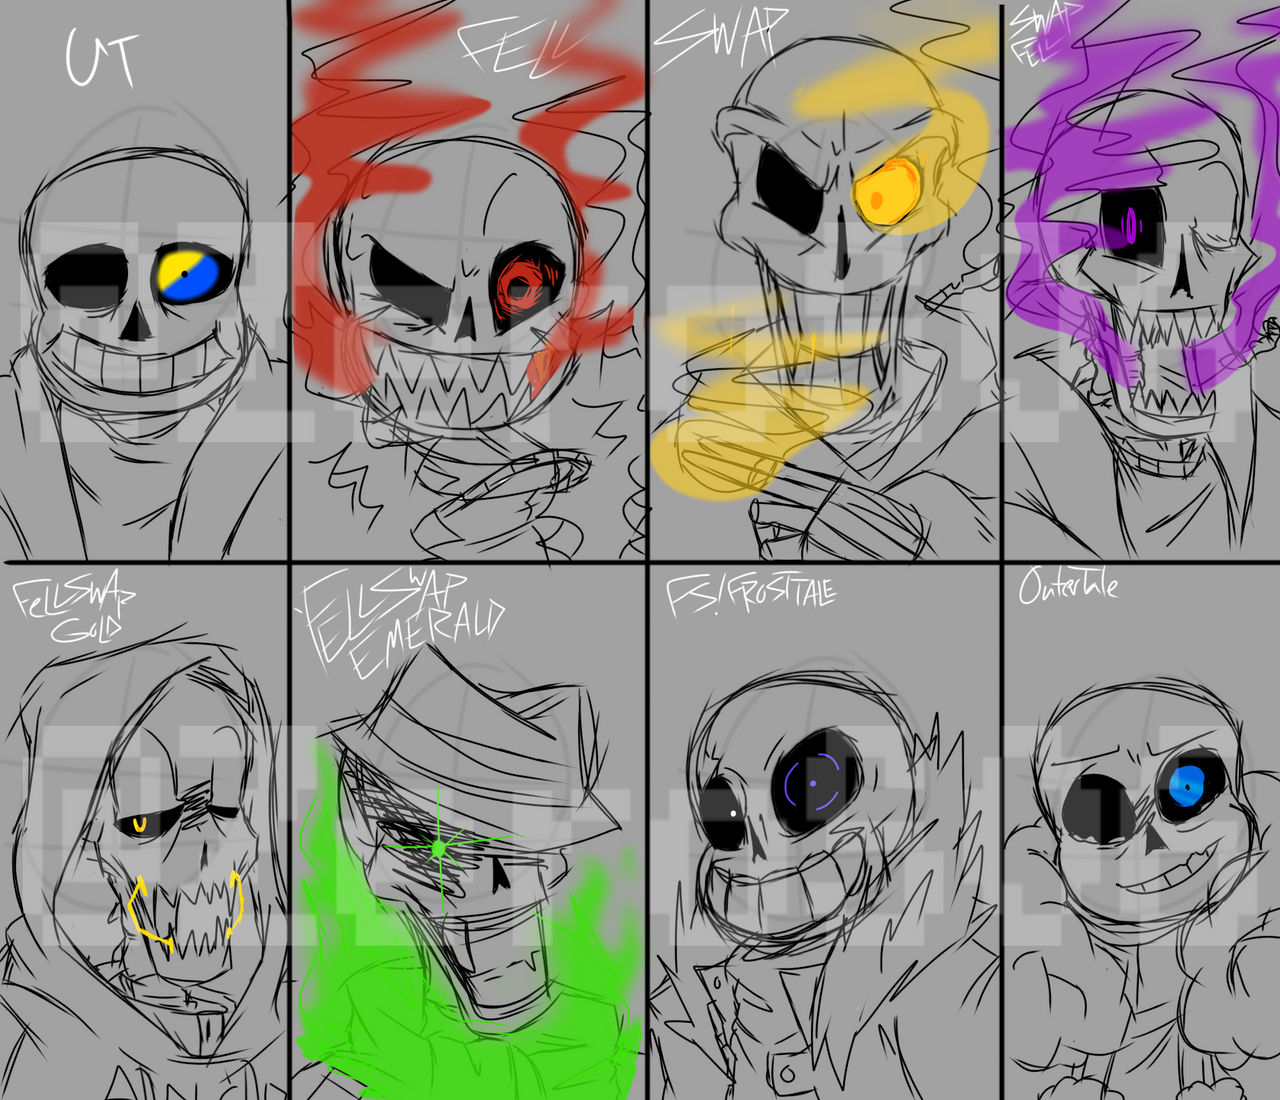 8 times the hell by ZeroSans06 on DeviantArt